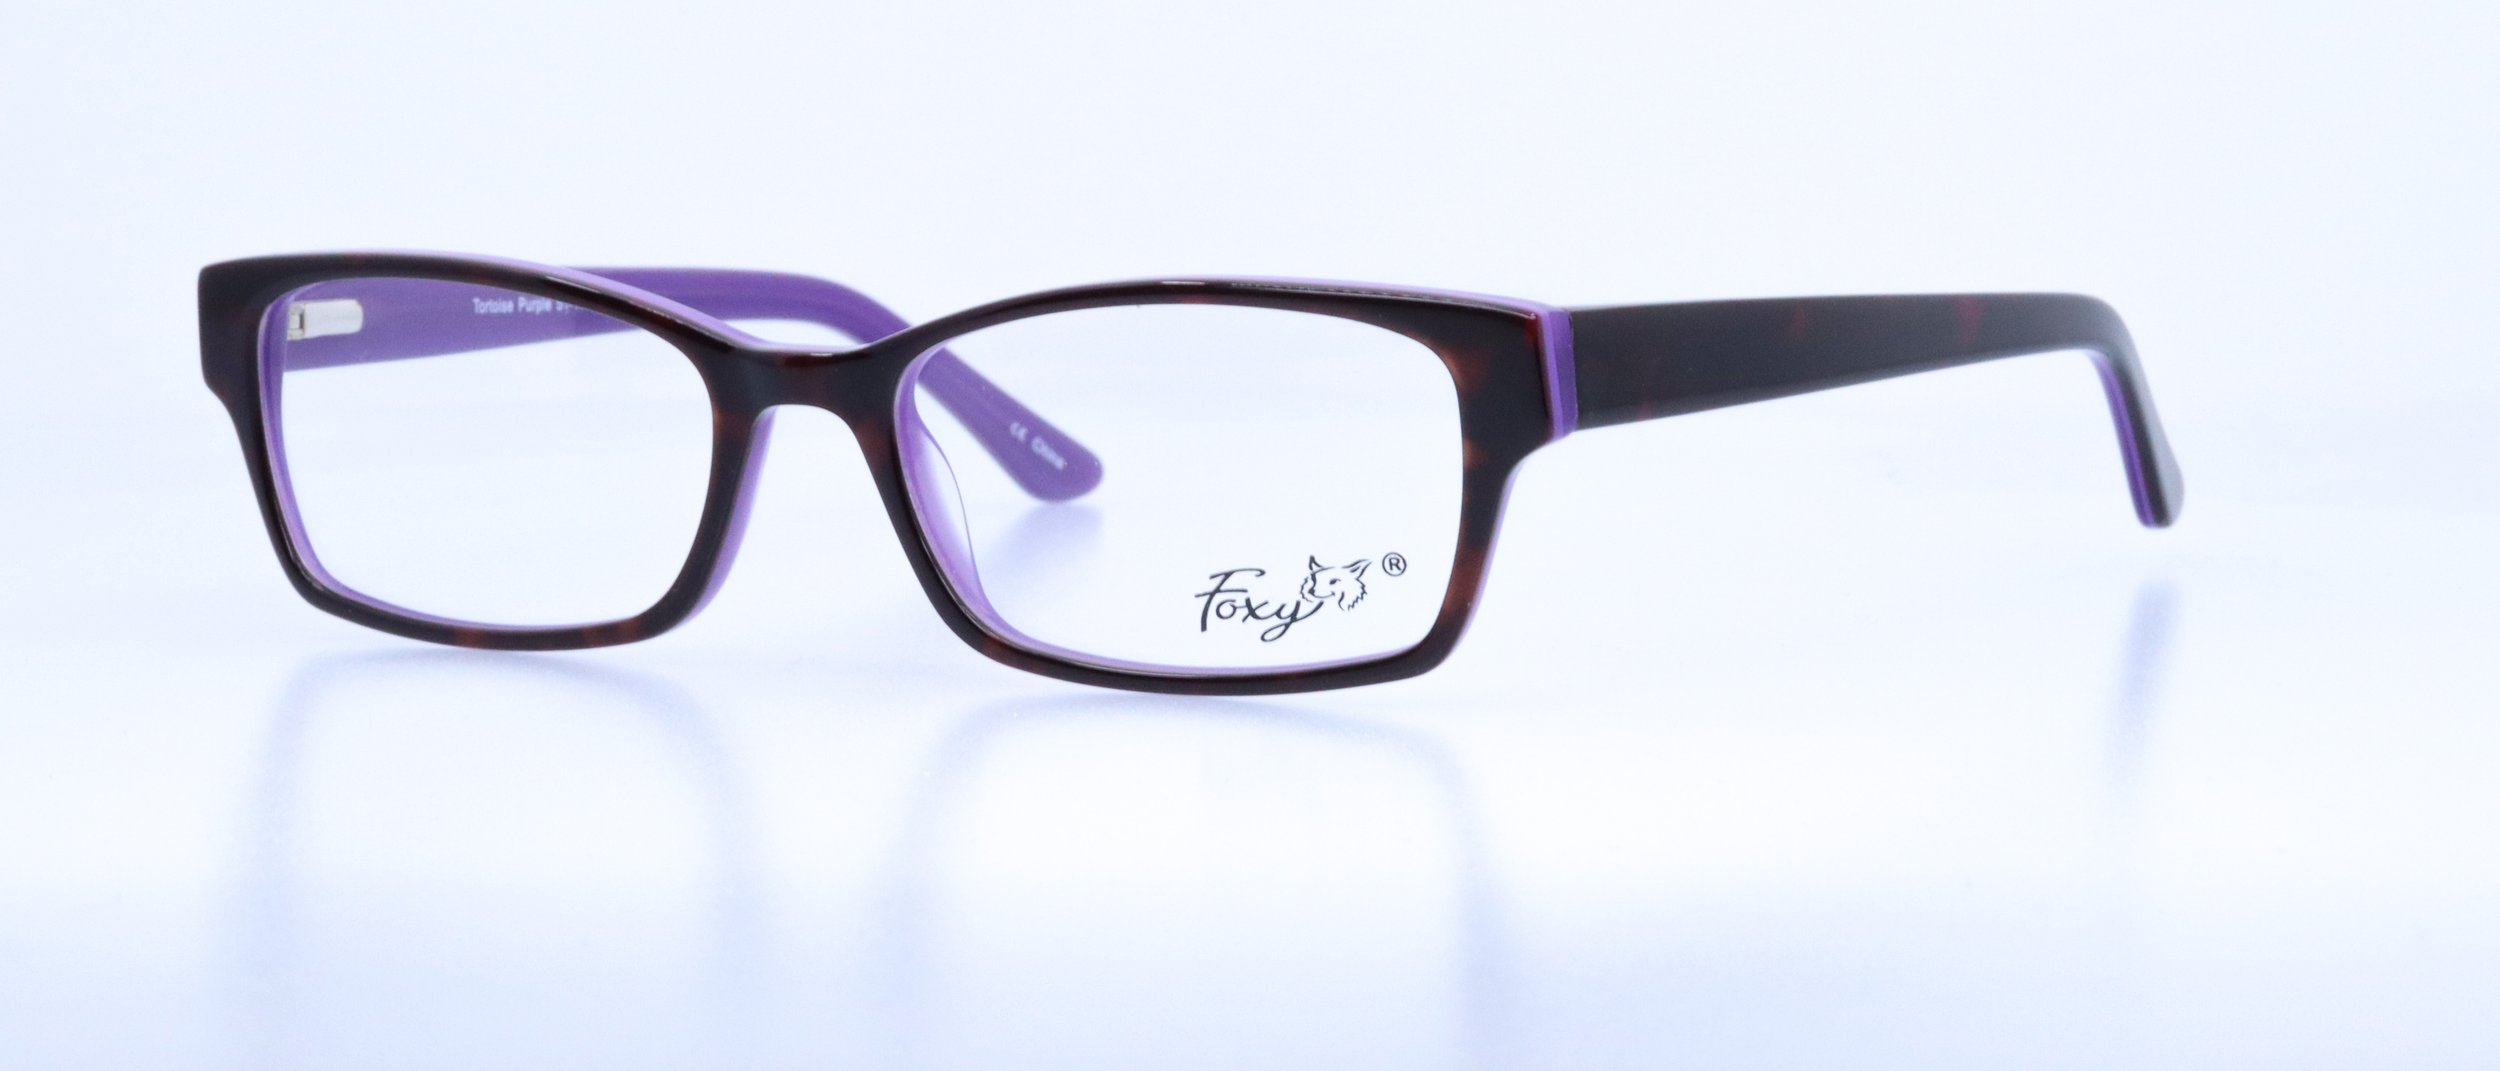  Flirty: 51-17-135, Available in Chestnut, Sapphire, or Tortoise/Purple (Formerly Bounce) 